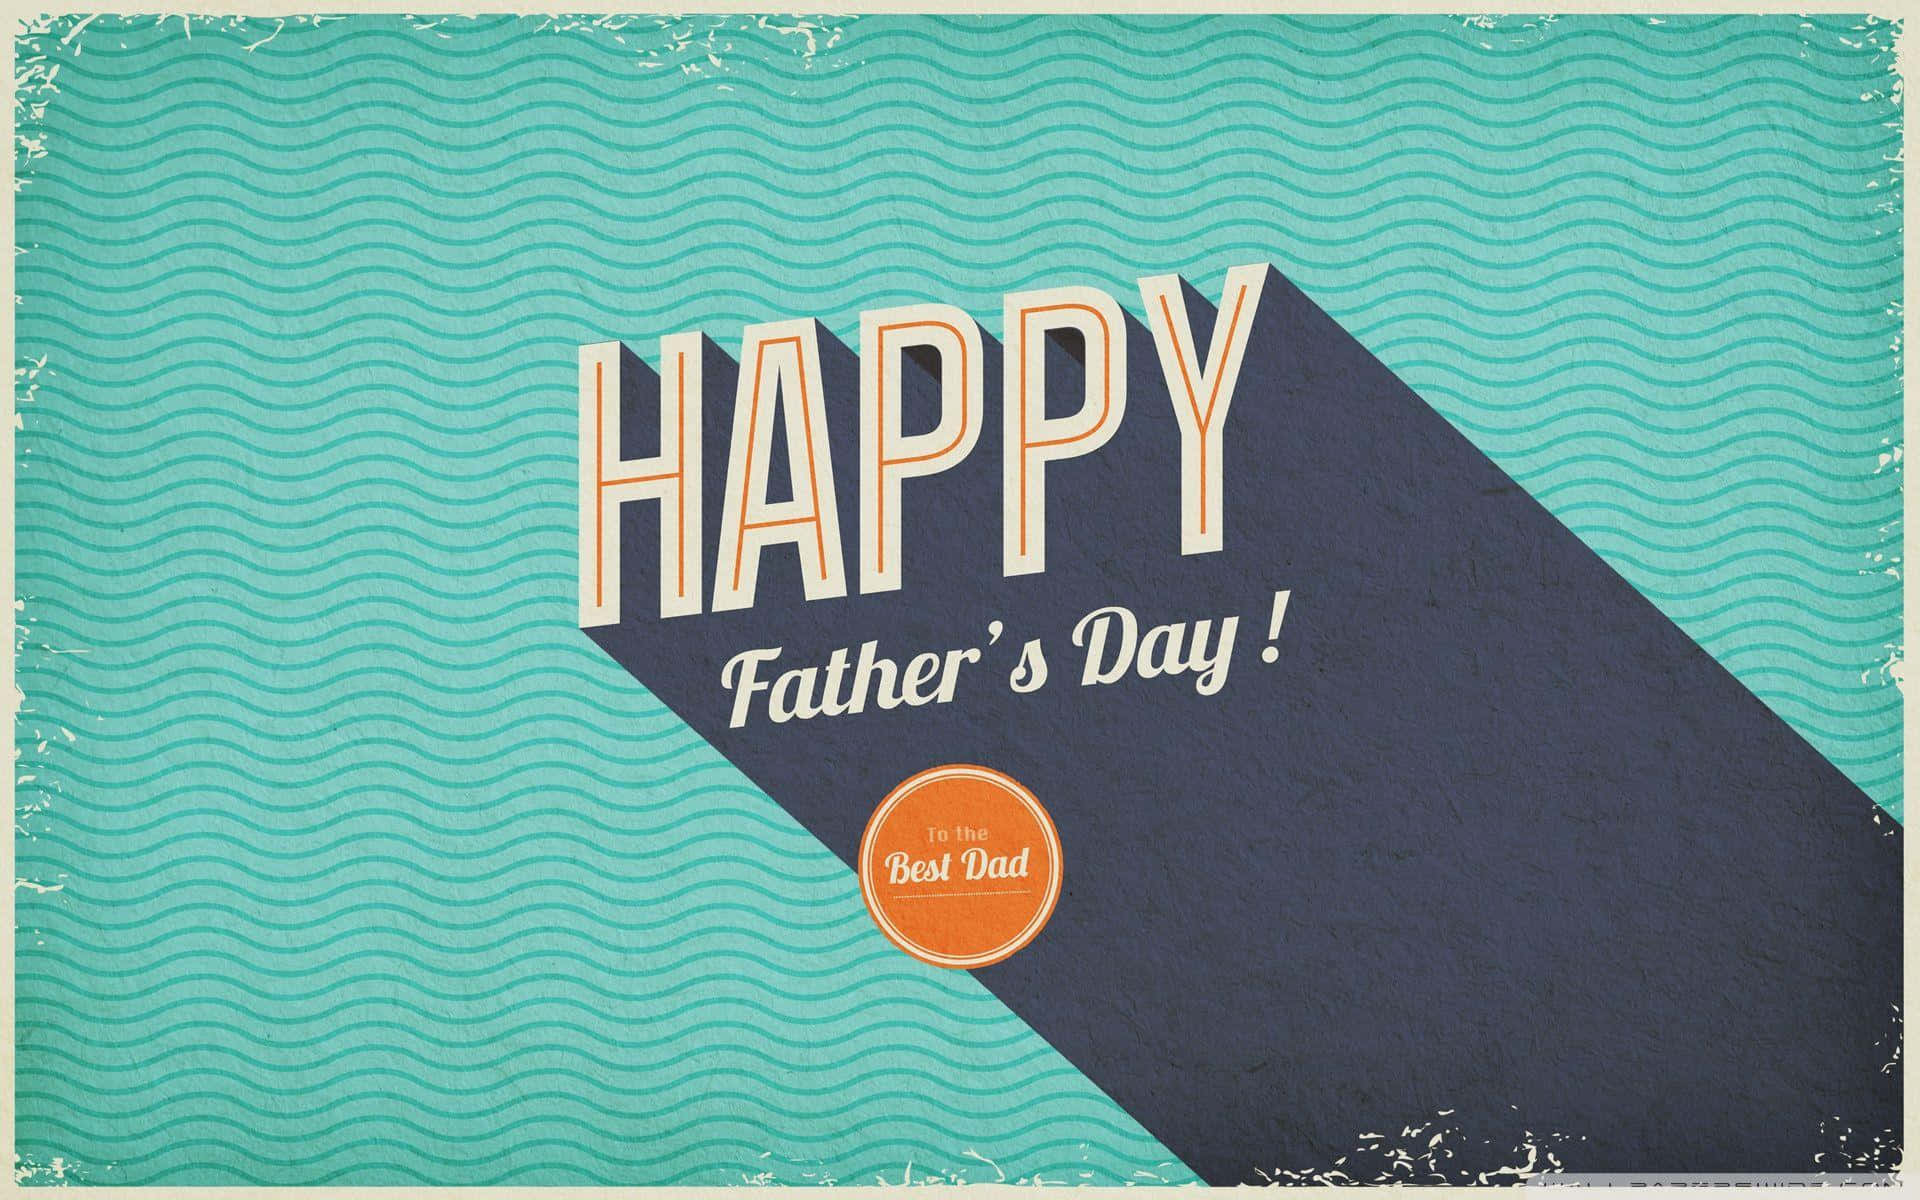 "Celebrate and appreciate the special bond between a father and child on Father's Day!"